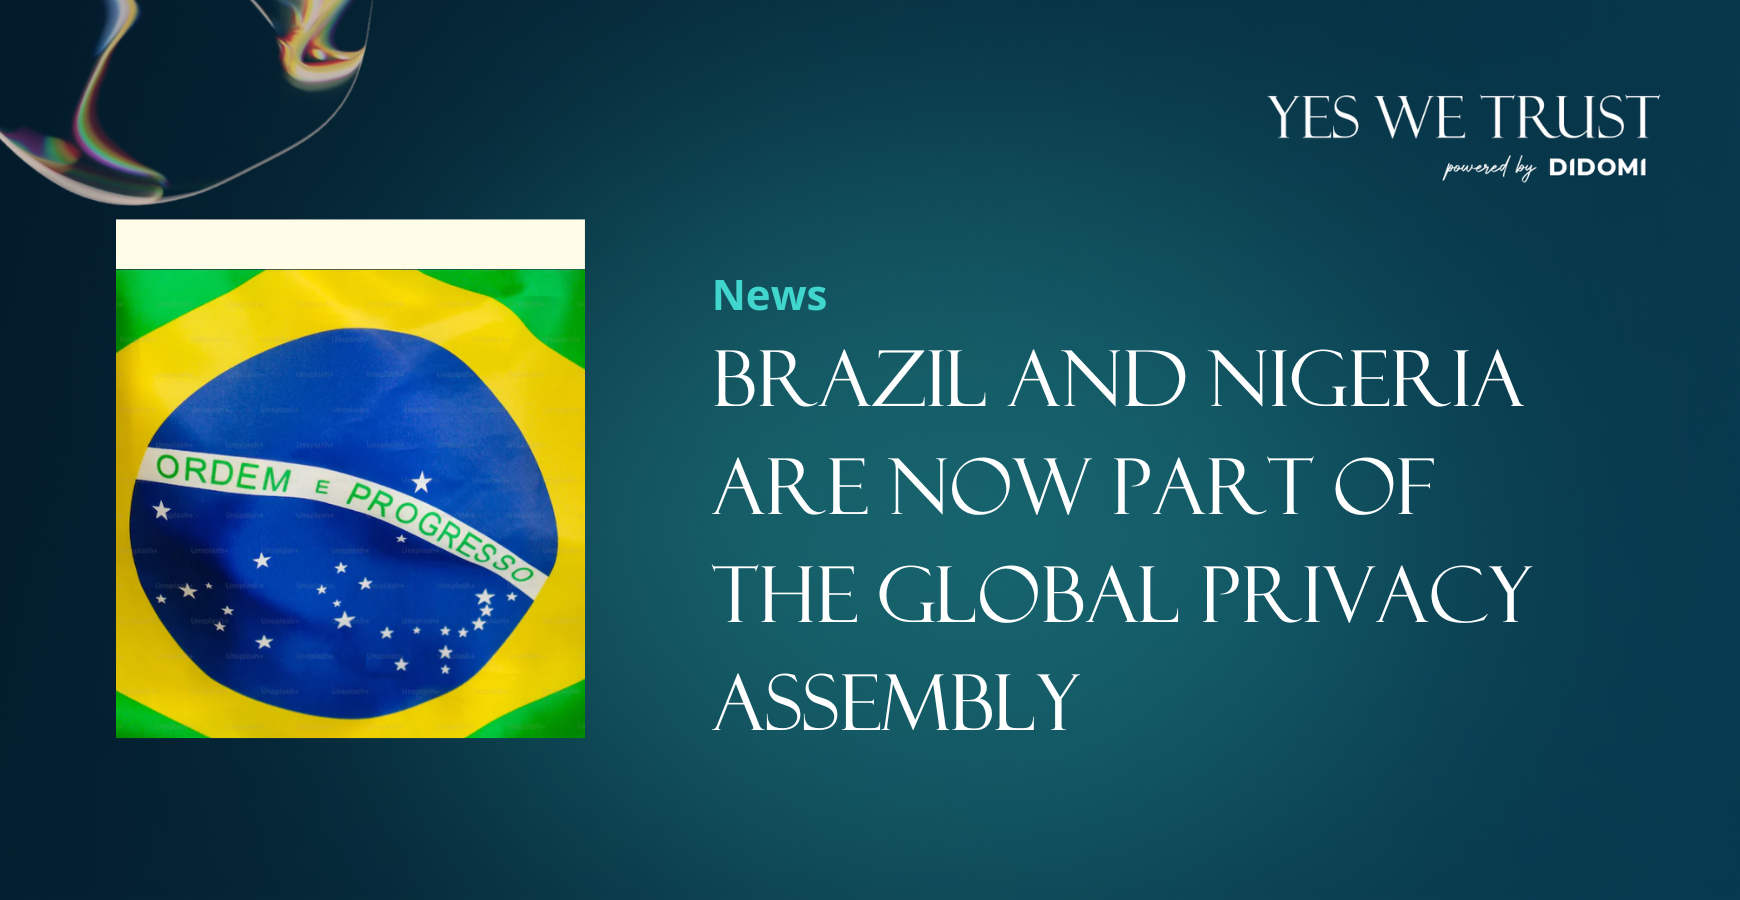 Brazil and Nigeria are now part of the Global Privacy Assembly